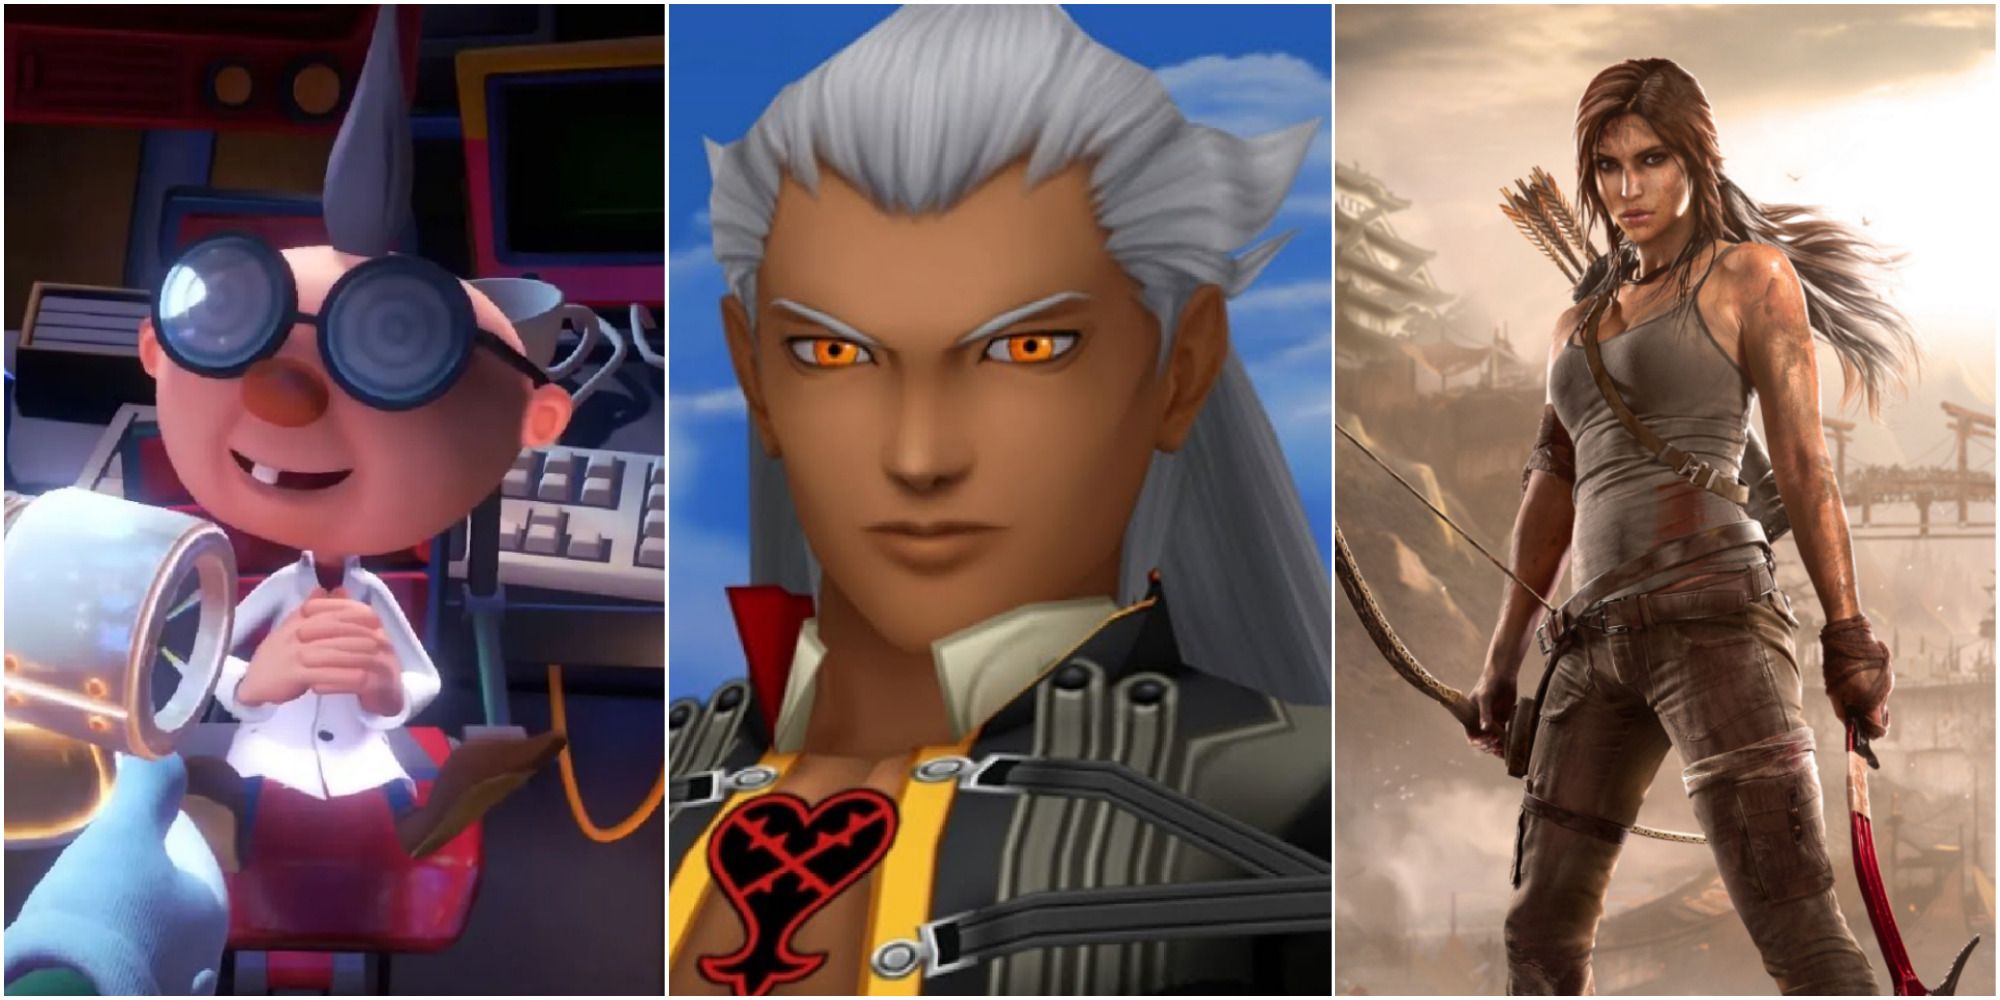 A collage of different video game scientists, including Professor E. Gadd from the Mario and Luigi's Mansion games; Ansem from Kingdom Hearts; and Lara Croft from Tomb Raider